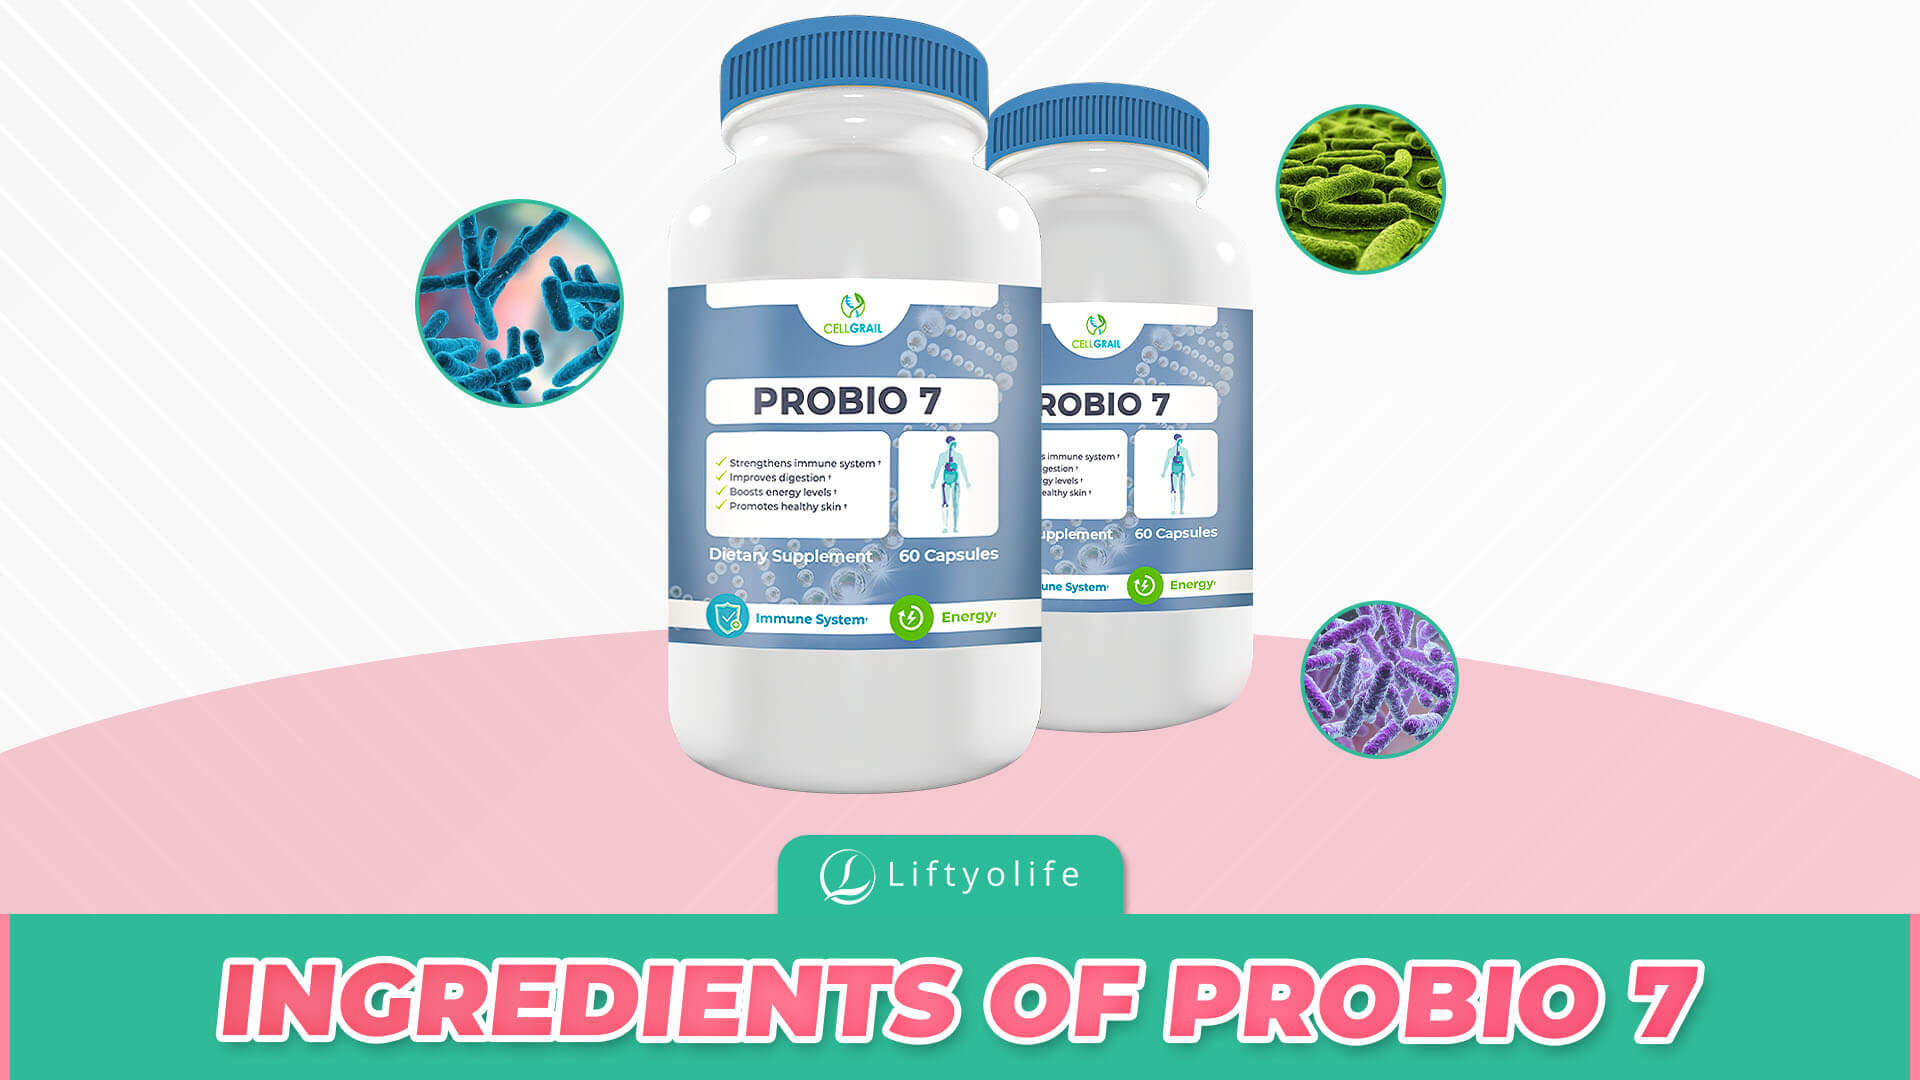 What Are The Ingredients Of Probio 7?